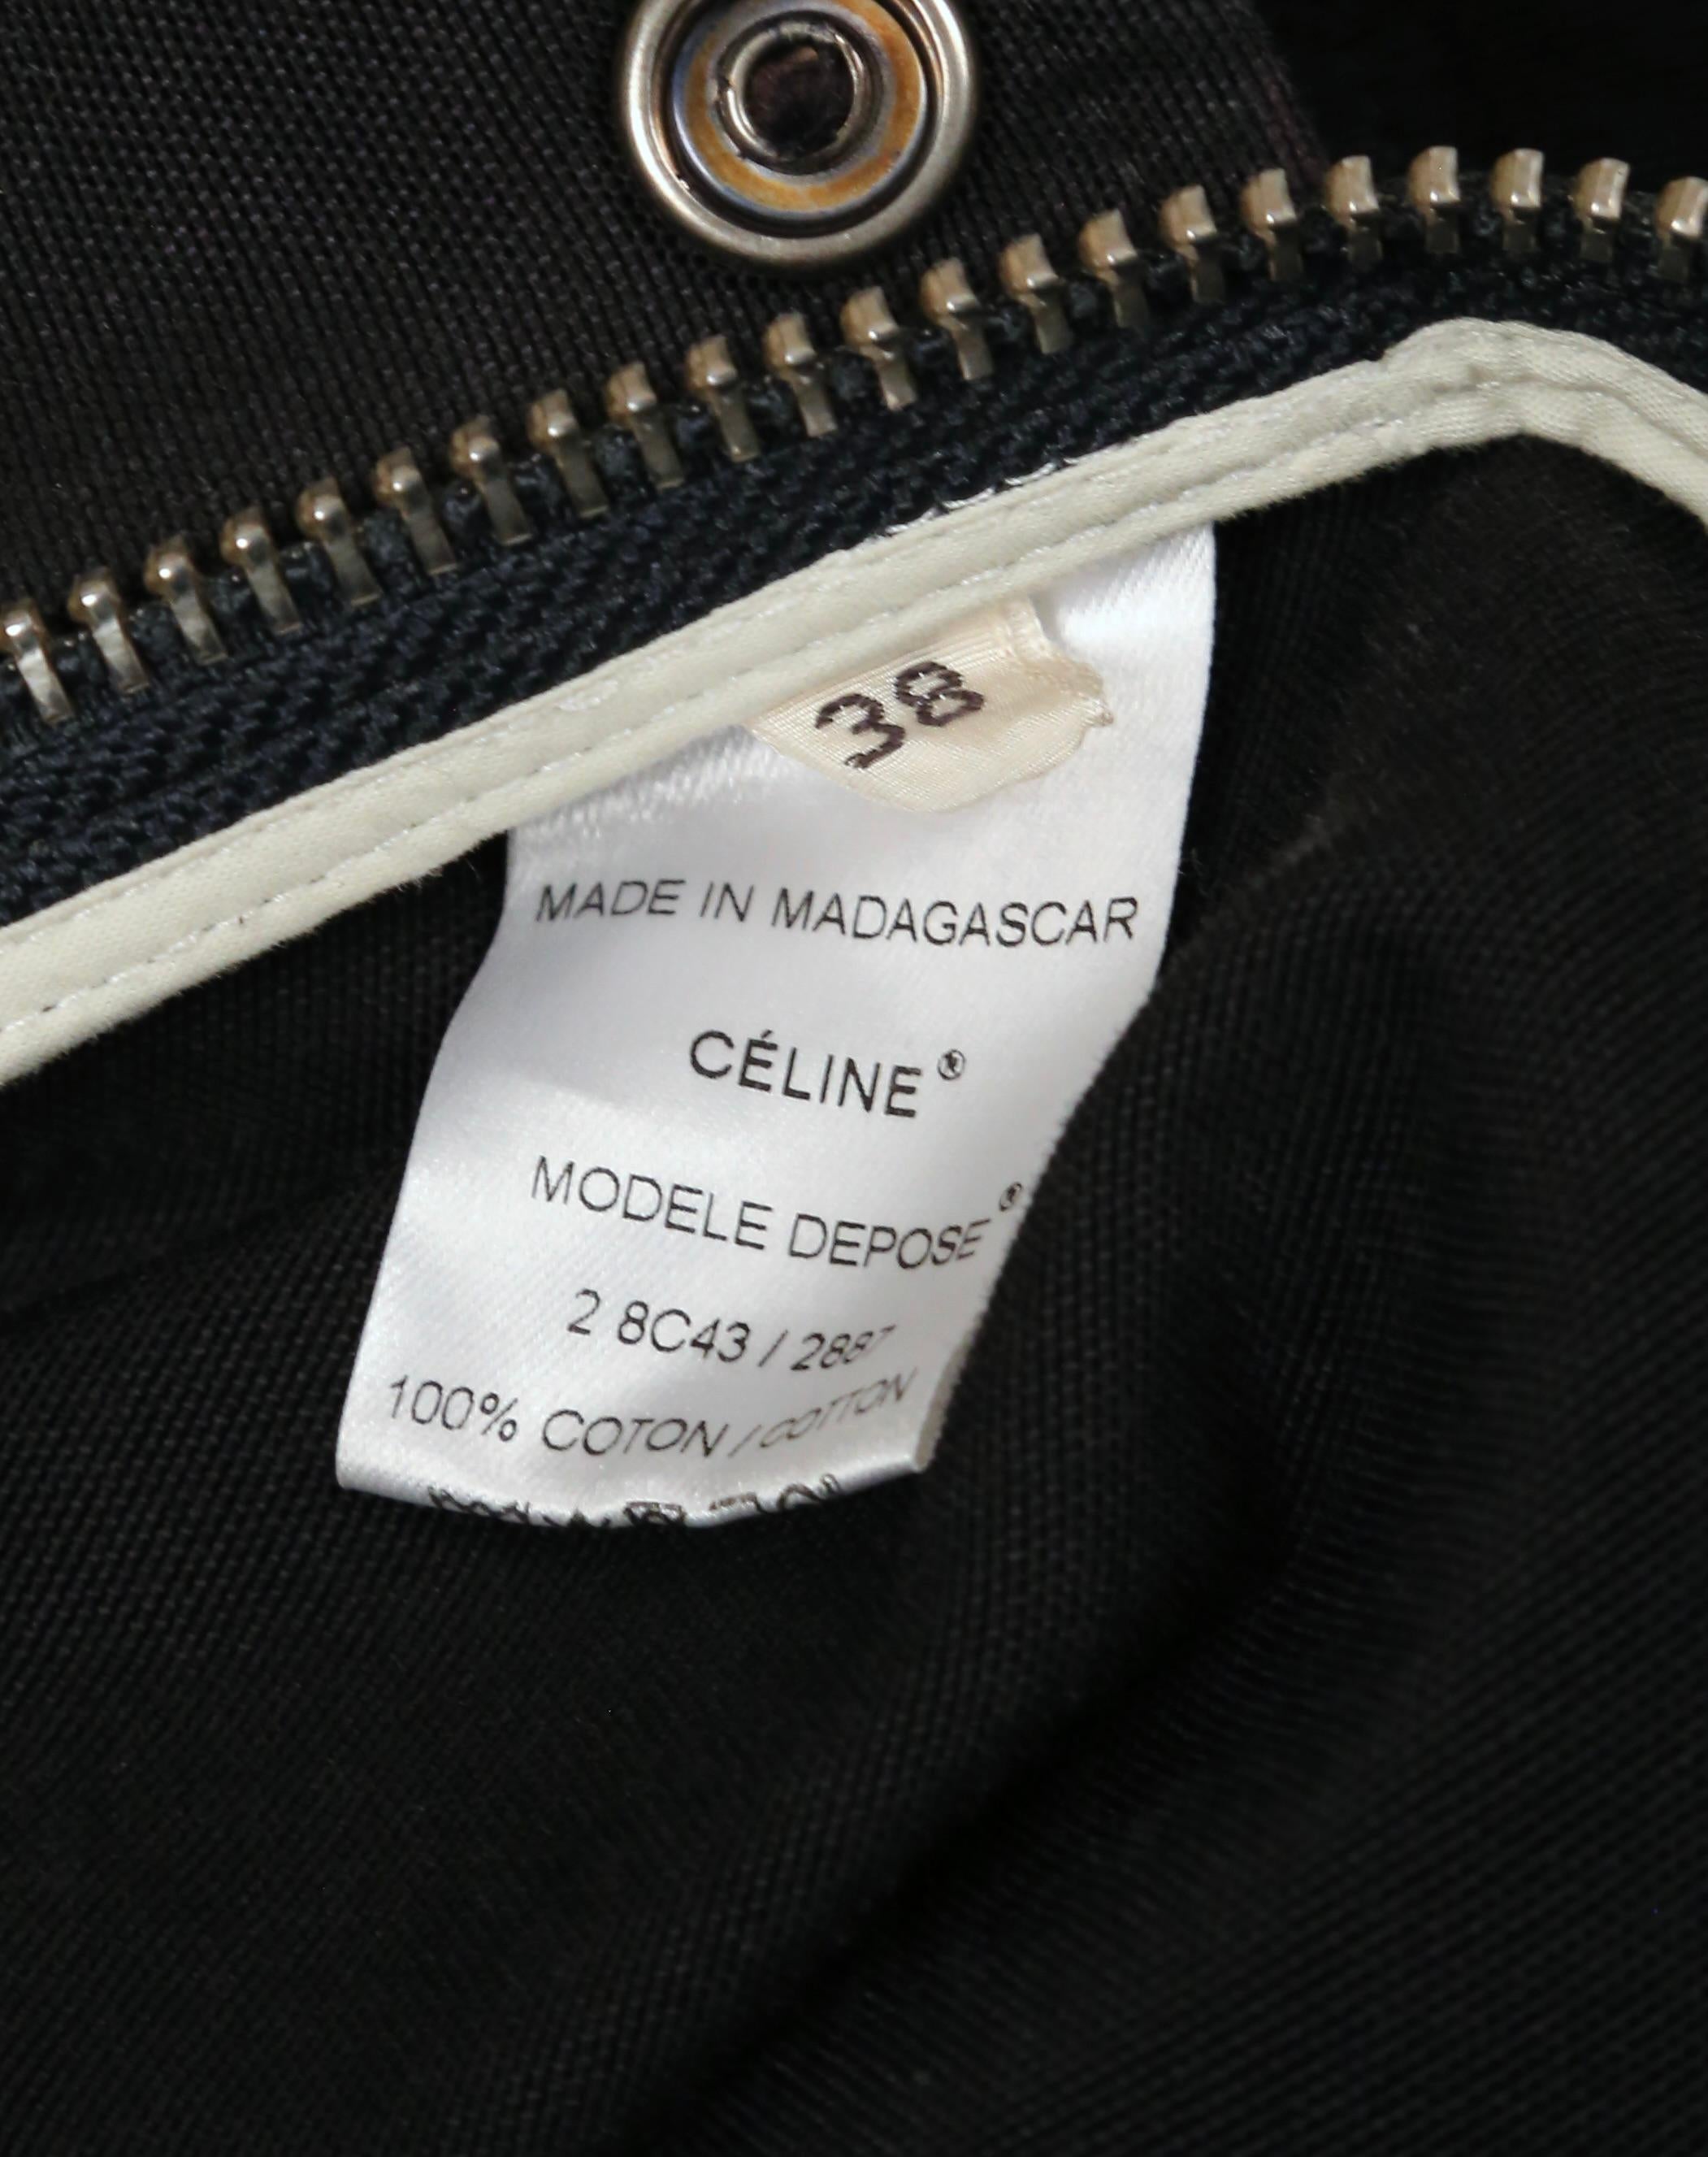 2011 Celine By PHOEBE PHILO deep navy blue anorak jacket in cotton For Sale 4